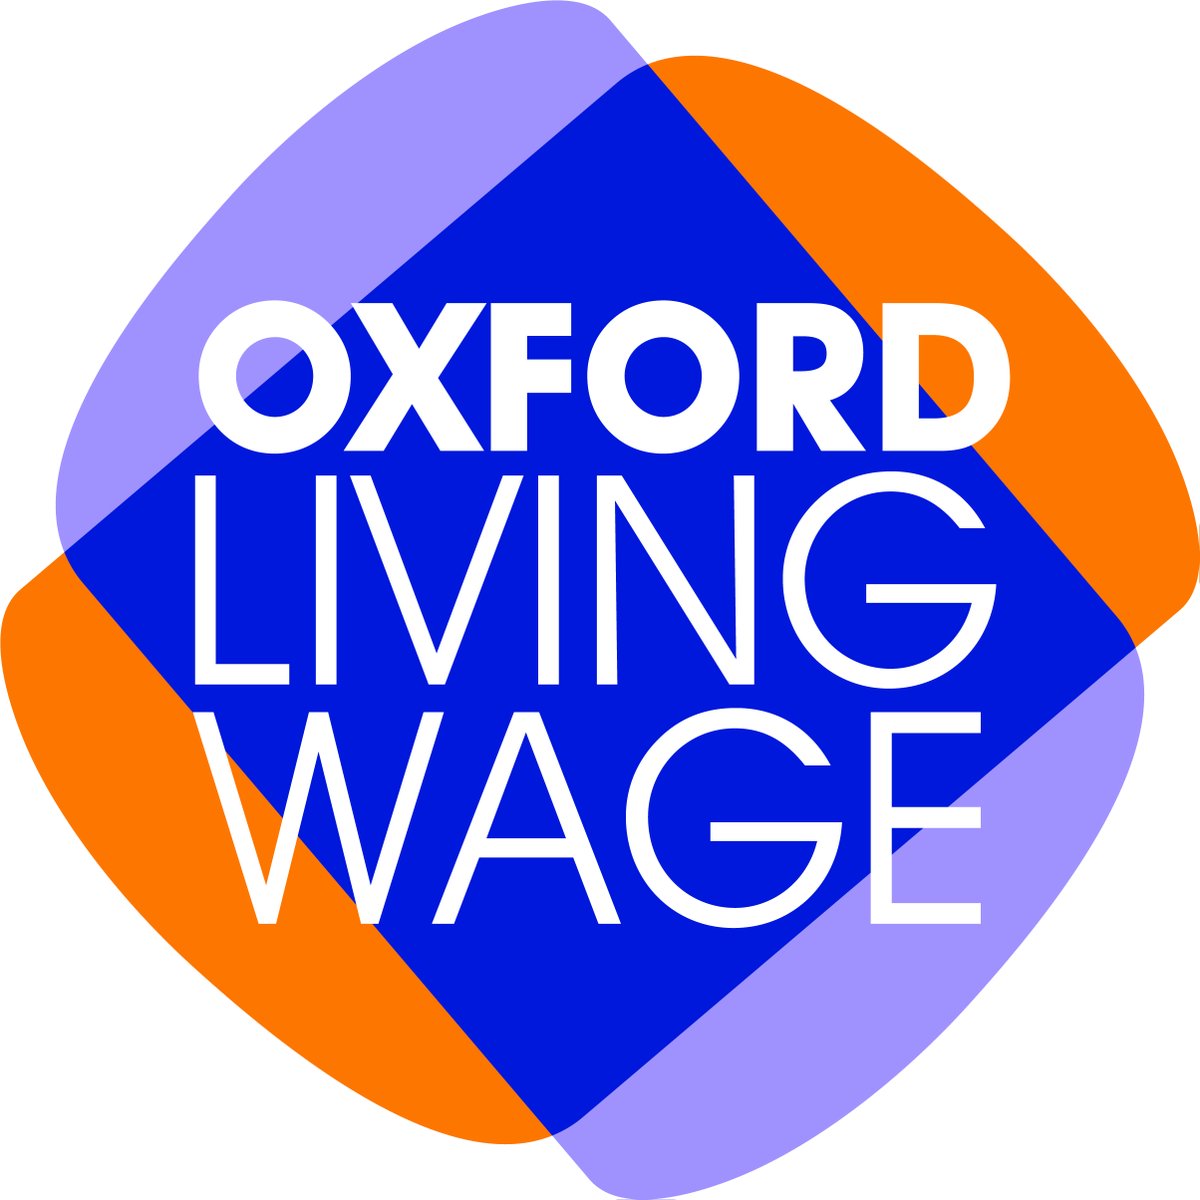 We are proud to announce that we are an Oxford Living Wage Employer! The Oxford Living Wage has been created to promote liveable earnings for workers. It reflects that Oxford is one of the most expensive cities to live in the UK
#oxfordlivingwage #livingwage #Oxfordshire